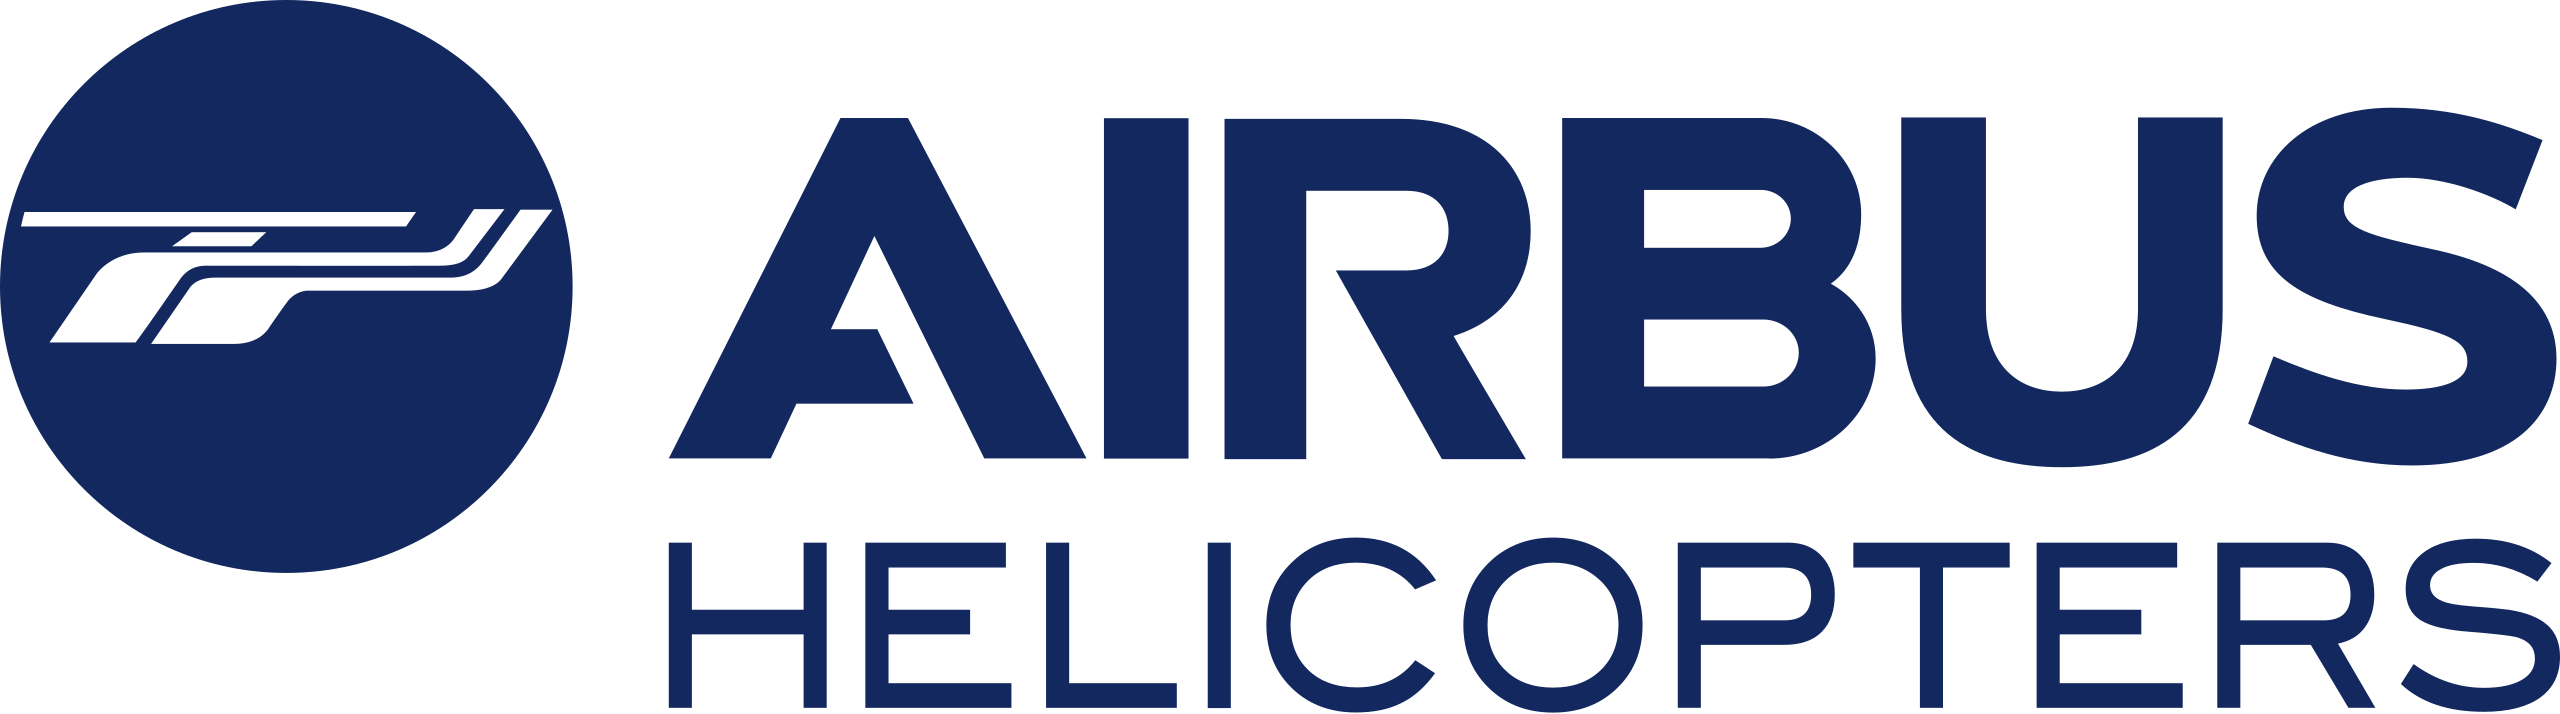 Airbus Helicopters S.A.S. logo